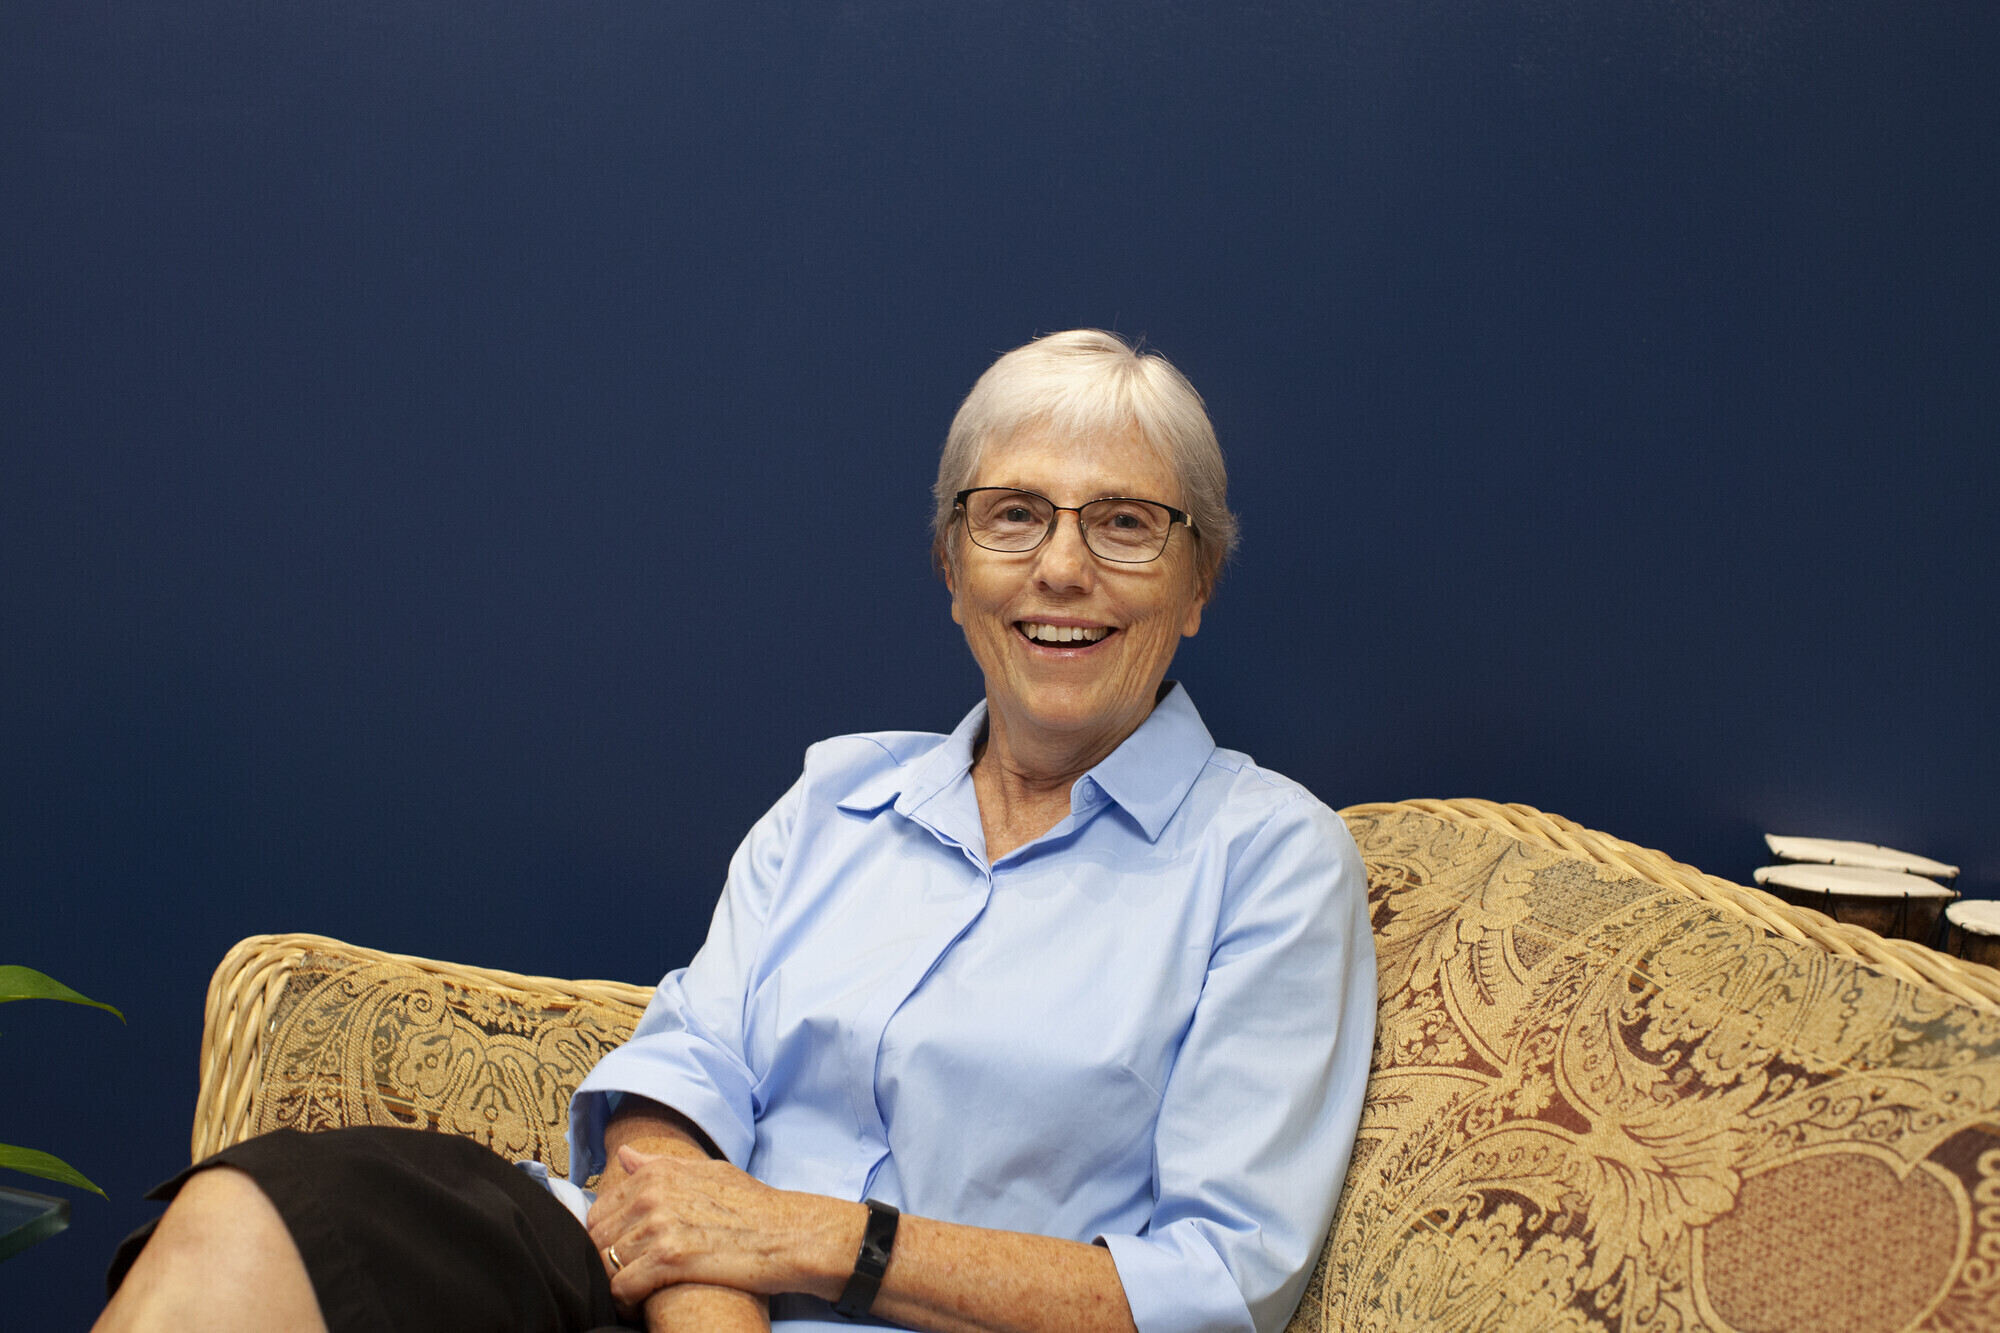 A smiling woman with glasses and short silver hair, wearing a blue collared button up shirt, sits on a couch and looks to her left into the camera.